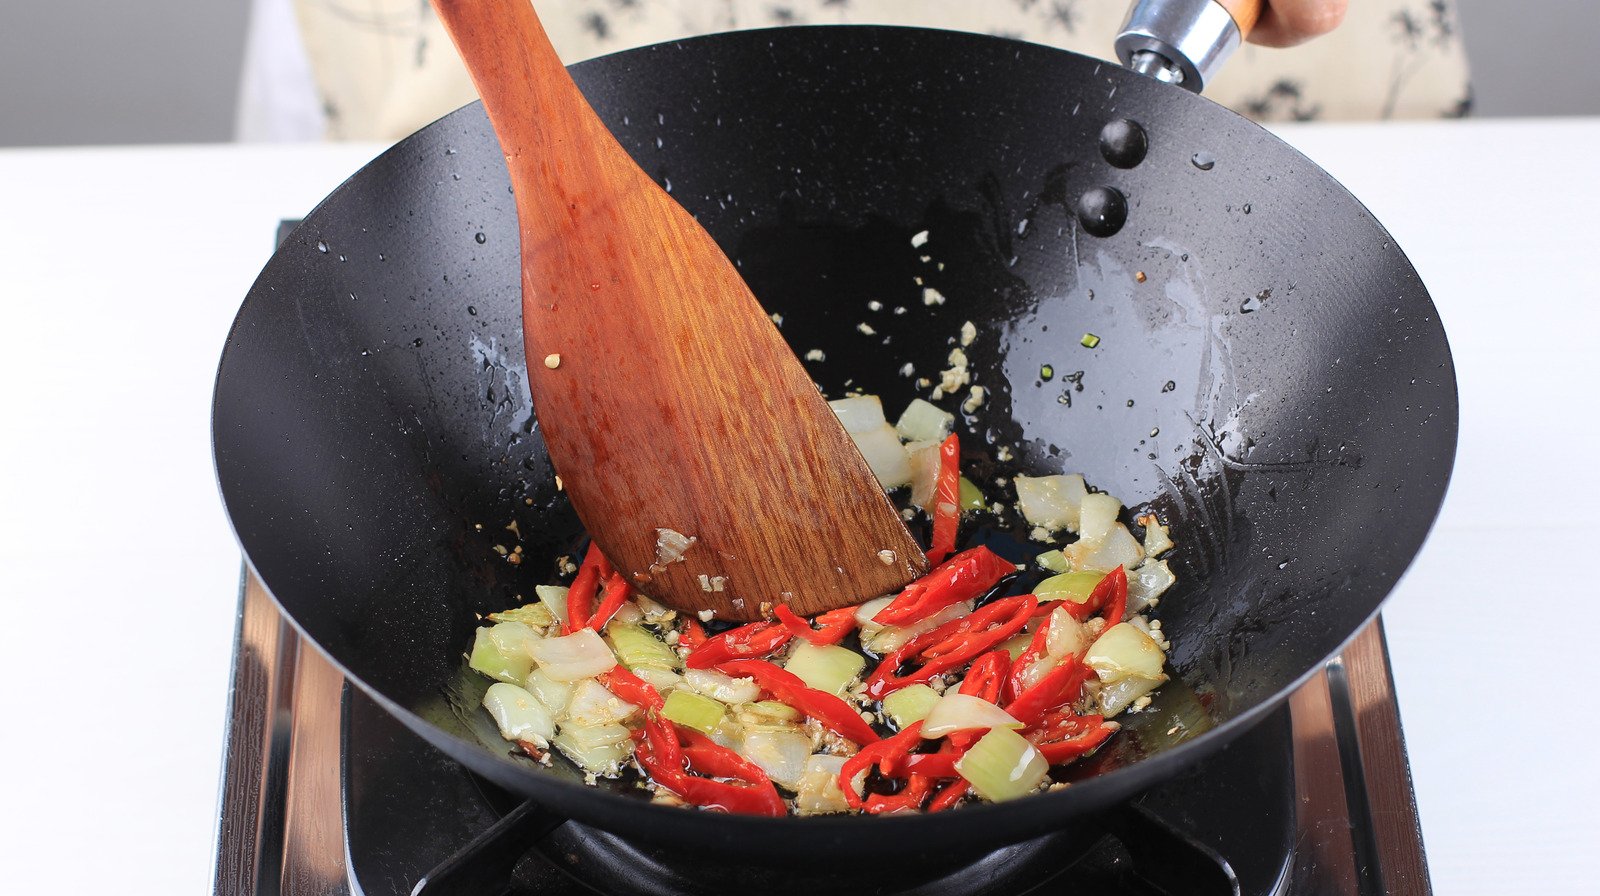 Big Mistakes Everyone Makes When Sauteing